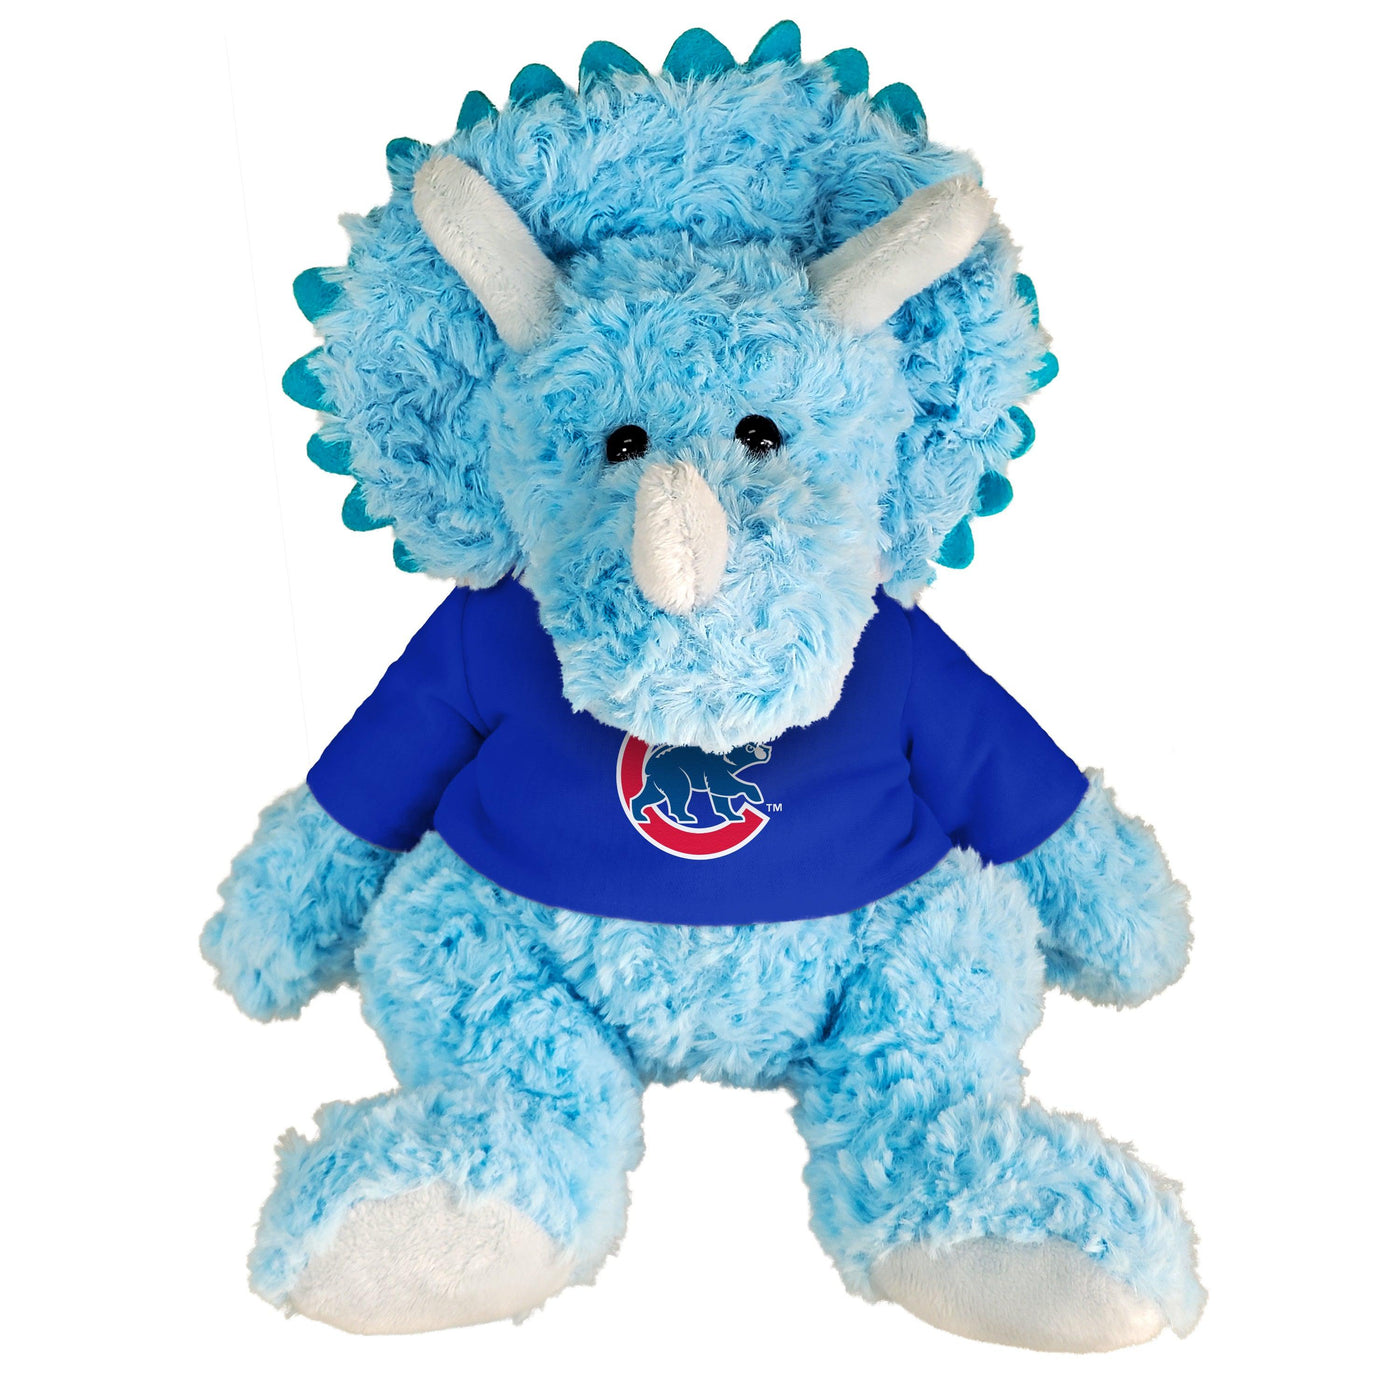 CHICAGO CUBS BLUE TRICERATOPS PLUSH